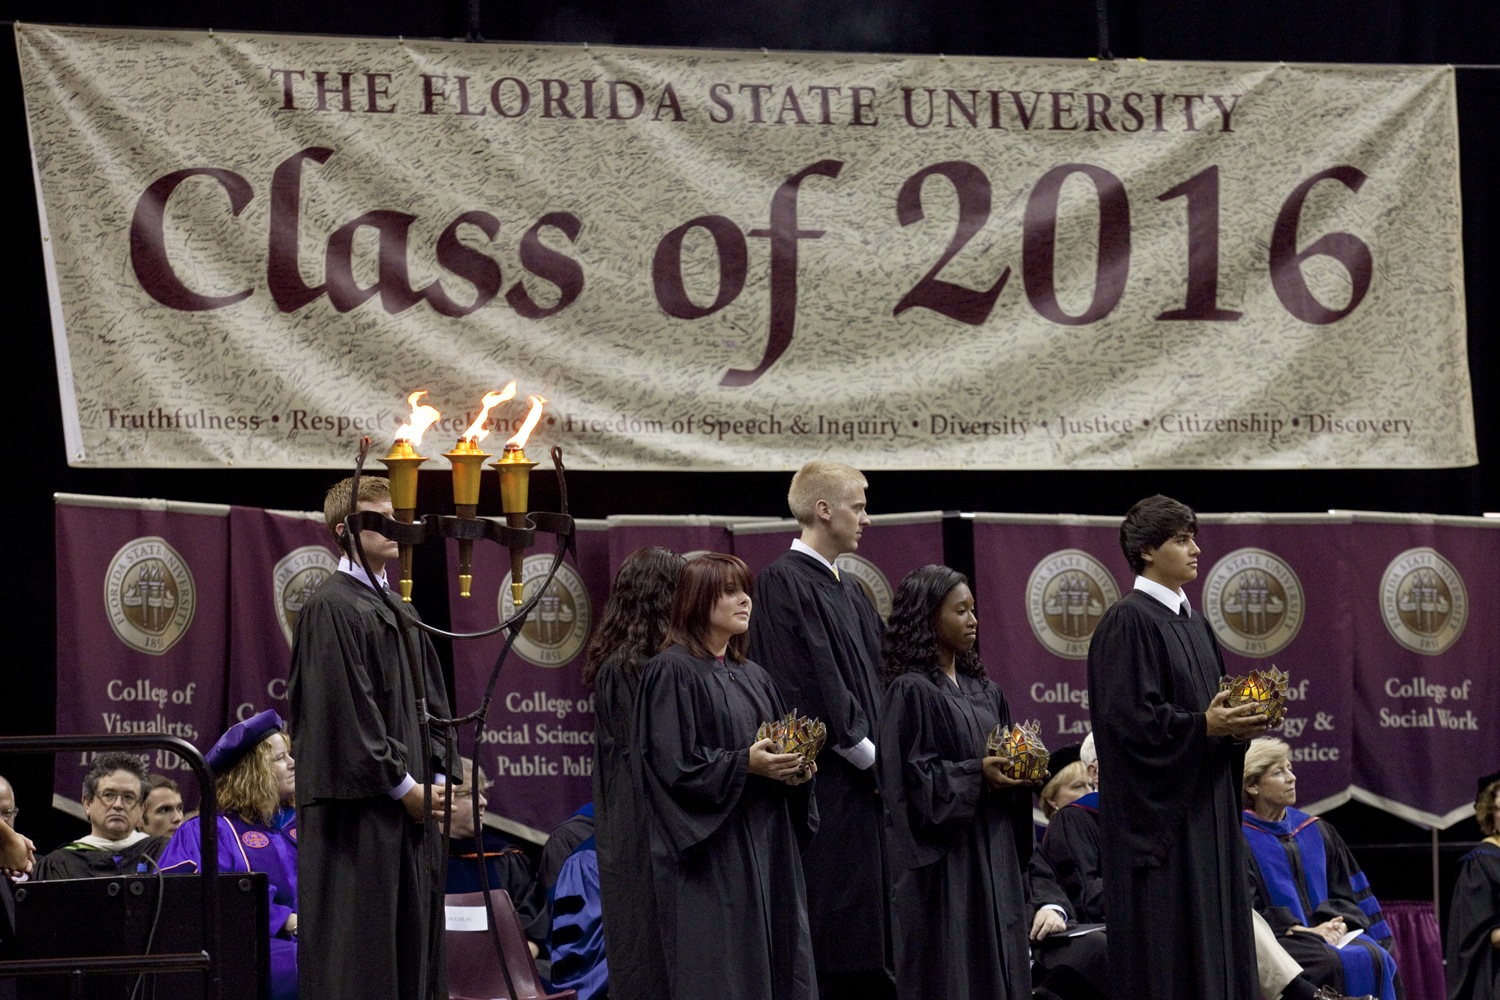 During the Torch Ceremony, three upperclassmen passed torches to three freshmen, symbolically passing the university’s ideals from one class to the next. The torches stand for Vires (strength), Artes (skill) and Mores (character) as depicted in the Florida State University seal.